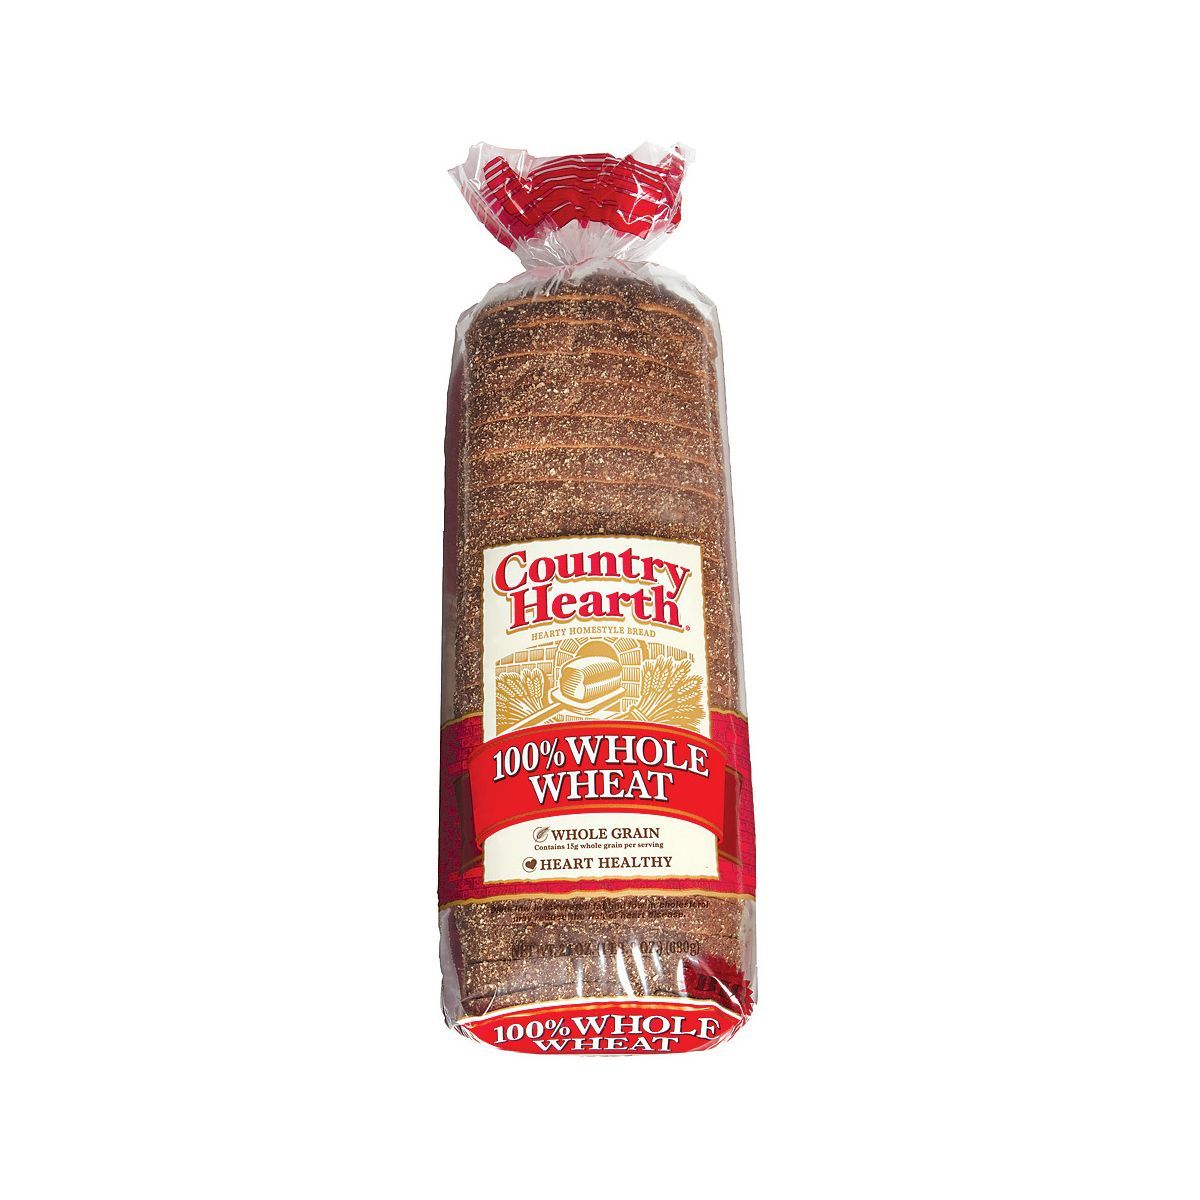 Country Hearth 100% Whole Wheat Bread - 24oz | Target